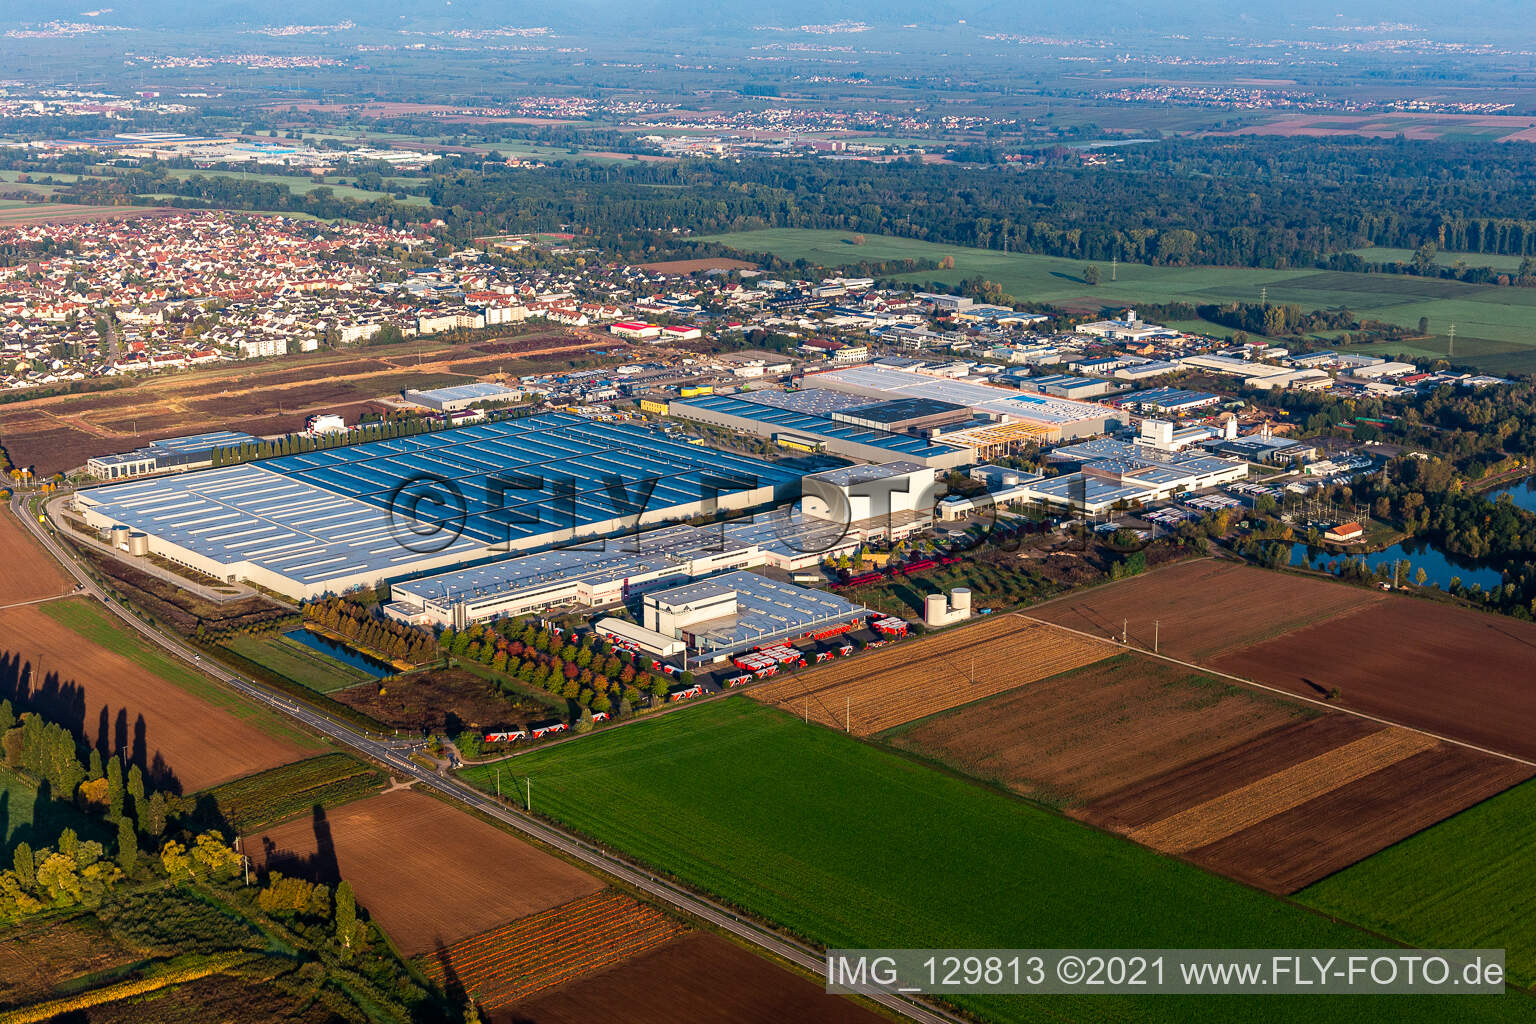 Interpark industrial area in Offenbach an der Queich in the state Rhineland-Palatinate, Germany